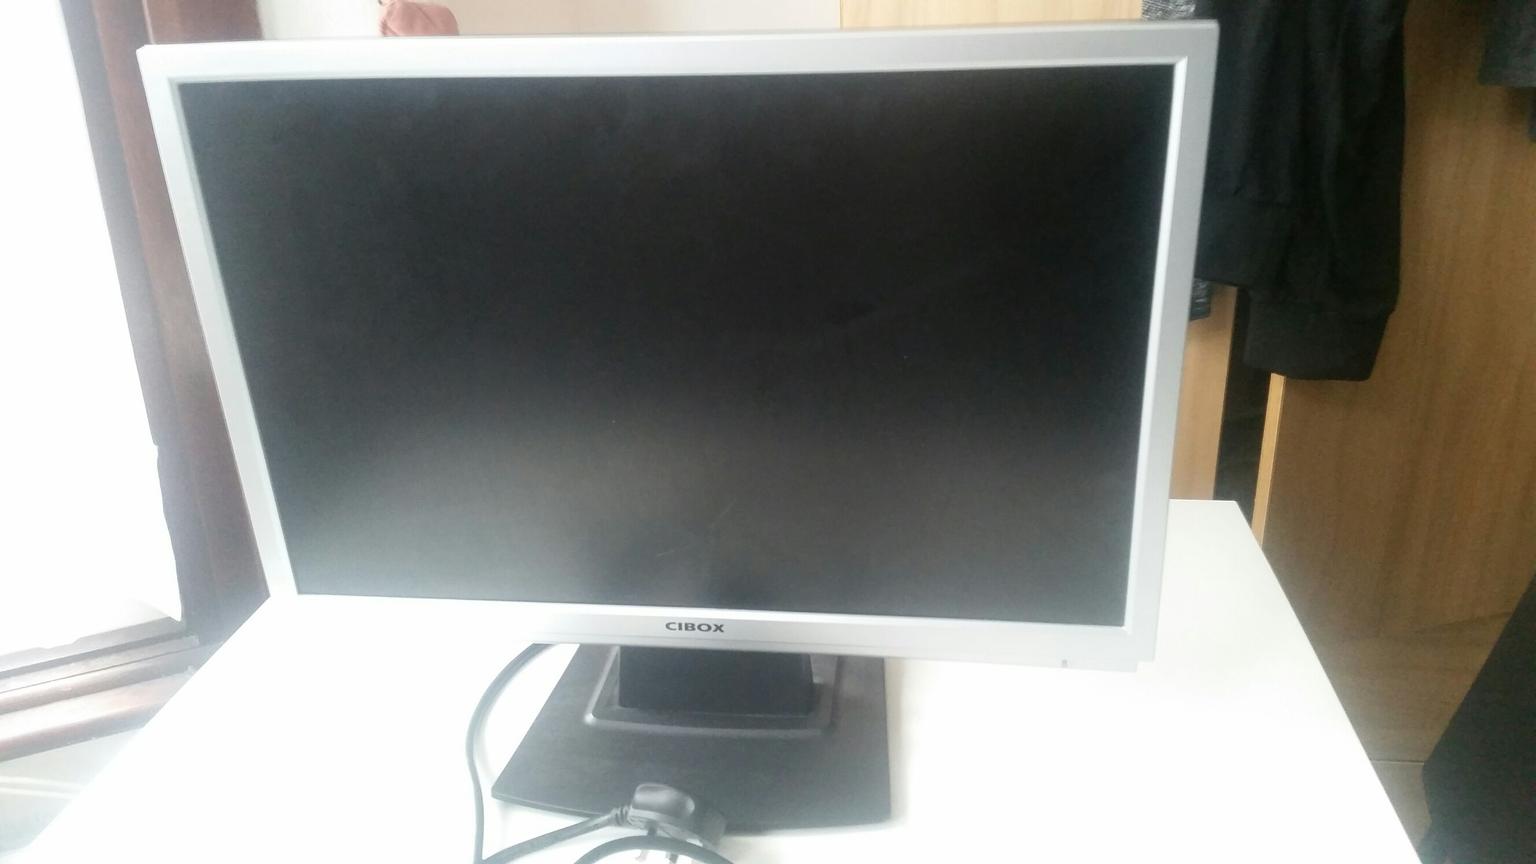 LCD MONITOR CIBOX 22 INCH HD in IG3 Ilford for £18.00 for sale | Shpock